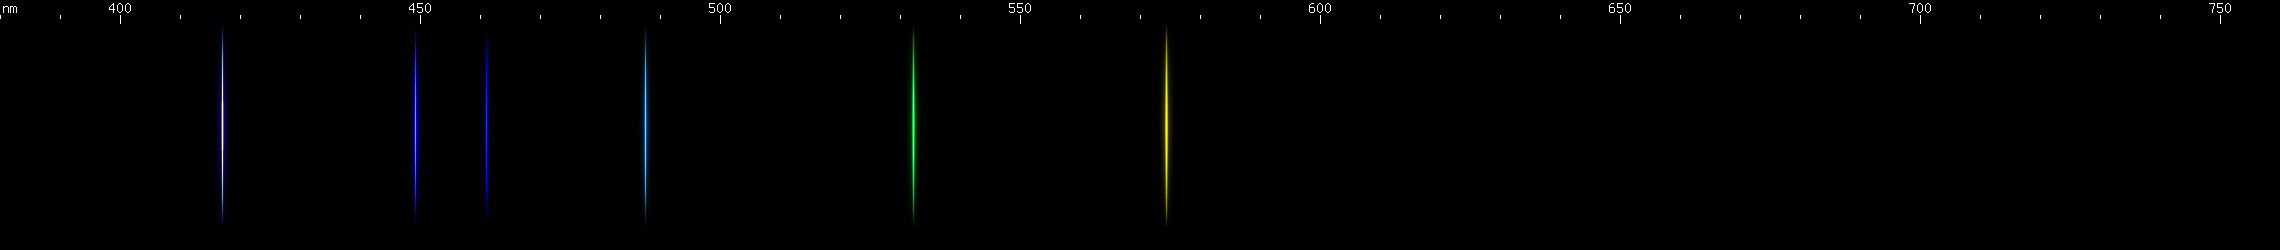 Spectral lines of Polonium.